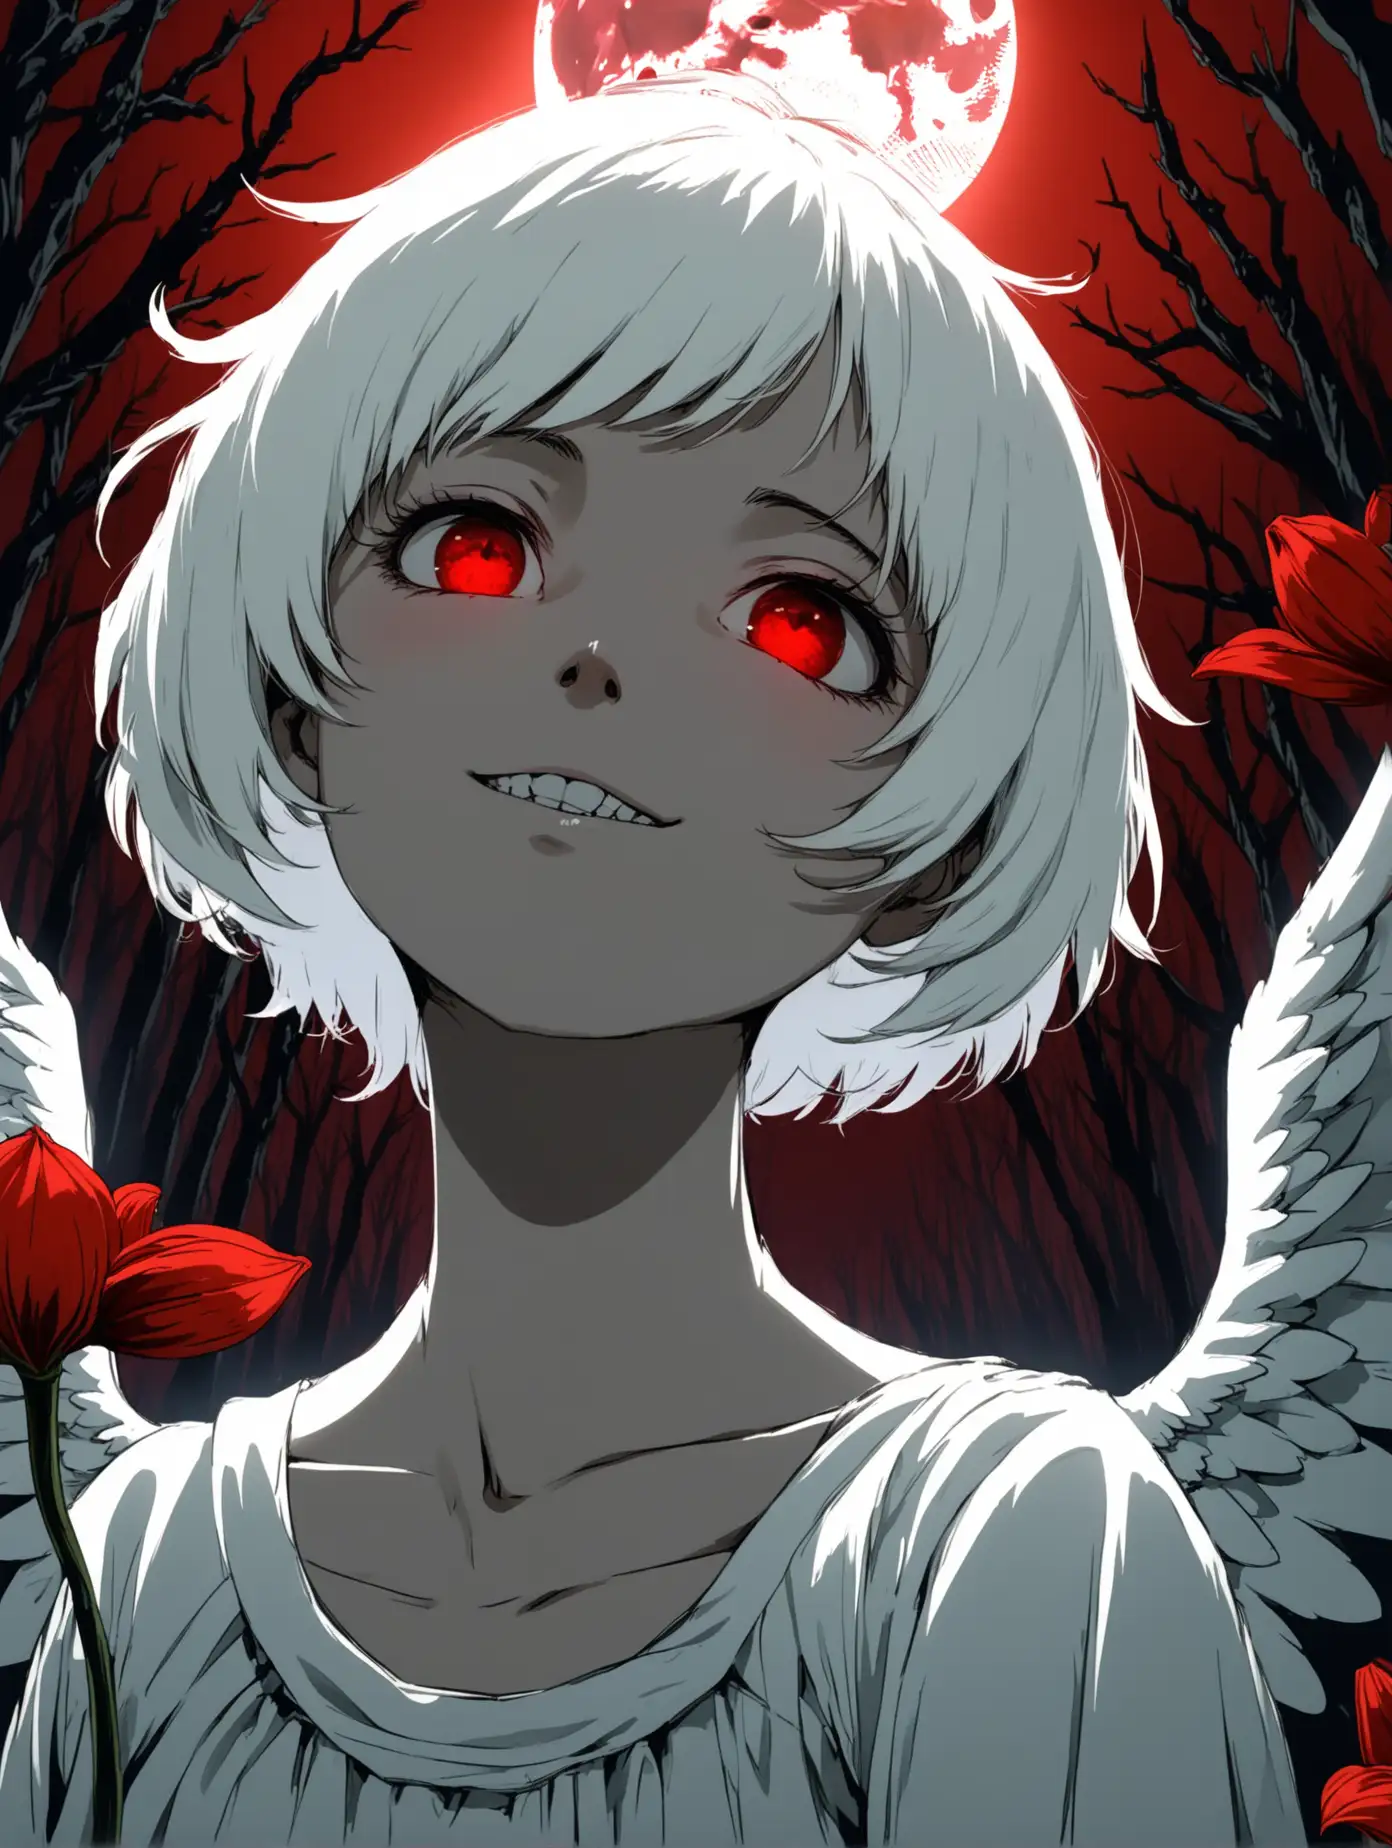 Angelic-Woman-with-White-Hair-and-Red-Eyes-Amongst-Red-Lilies-in-Night-Forest